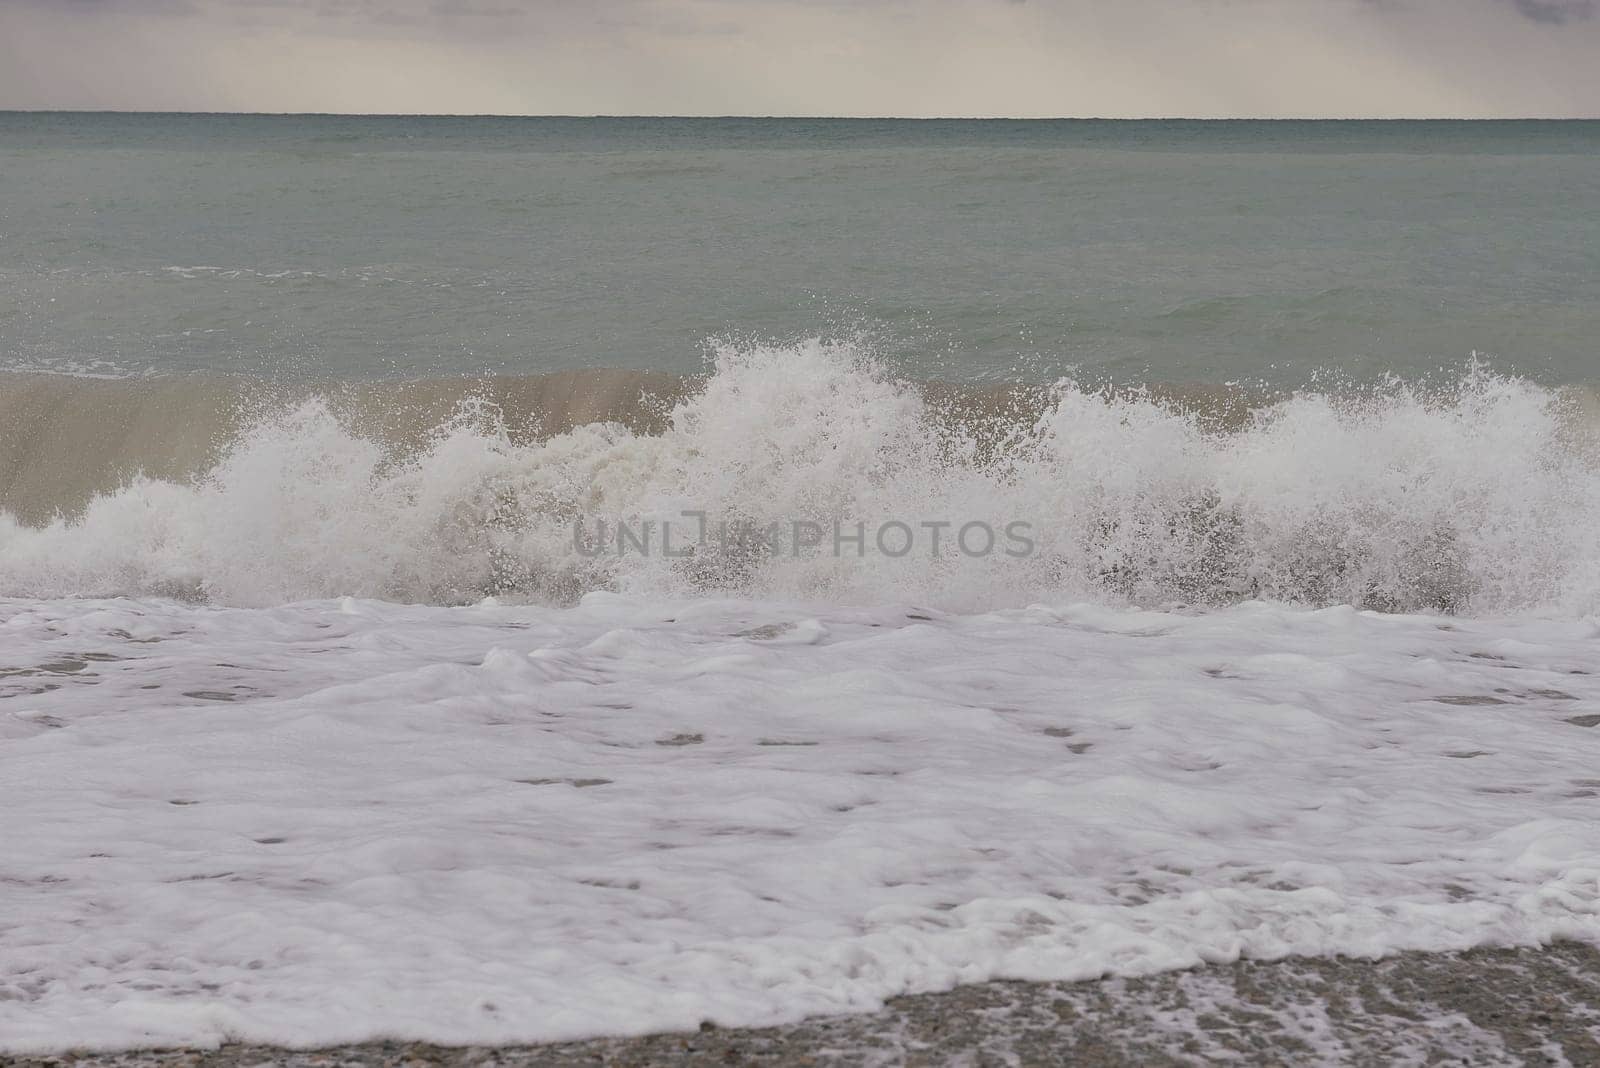 Waves breaking on the shore on small pebble beach. Storm clouds sky, turquoise water, waves,